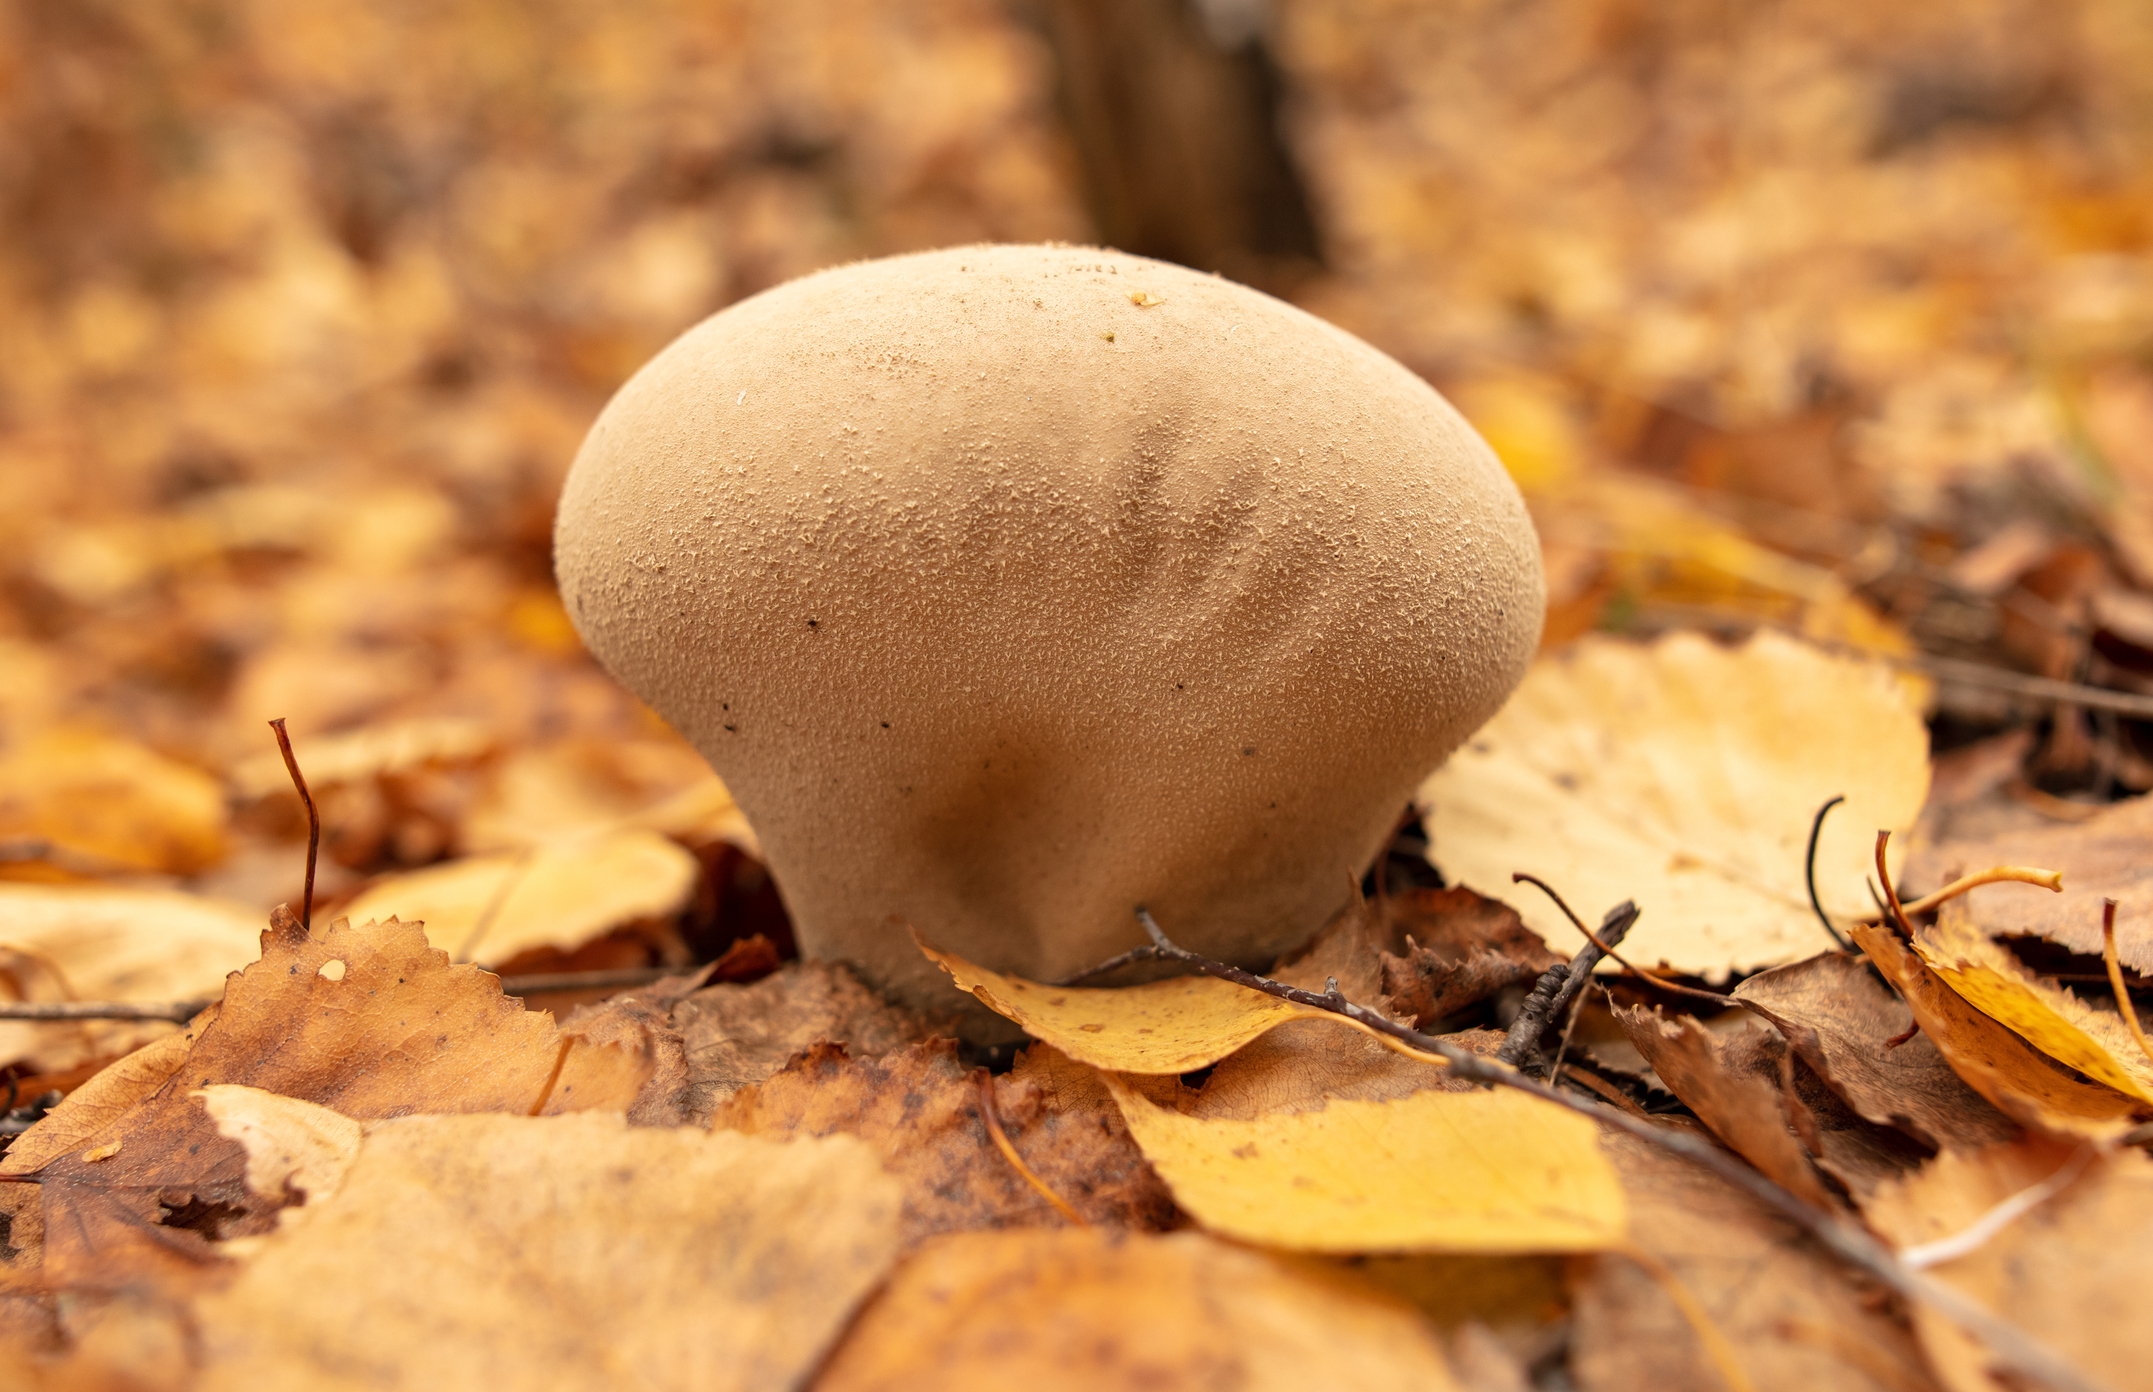 Illinois could name 'giant puffball' as official mushroom